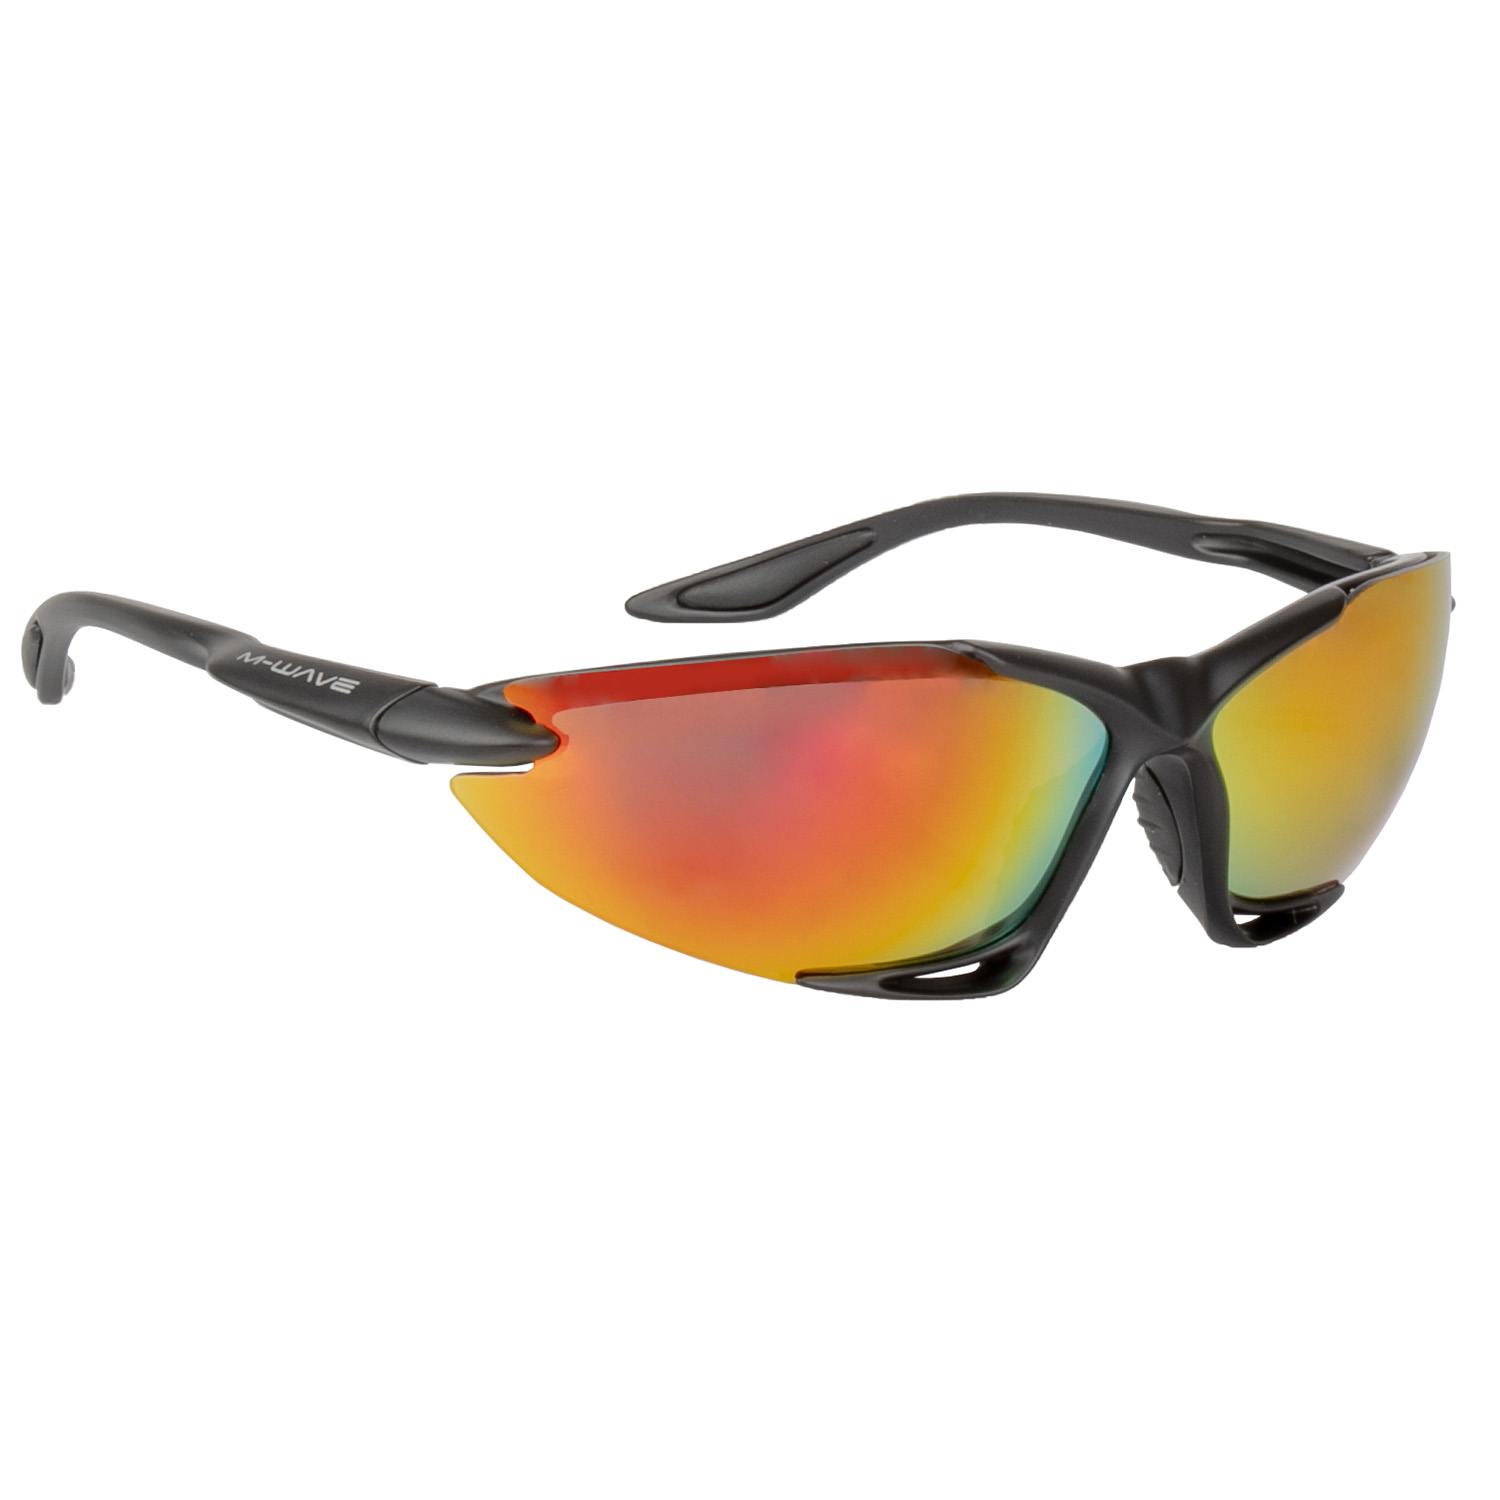 710162 M-WAVE Rayon G4 sports/bike eyewear – AVAILABLE IN SELECTED BIKE SHOPS